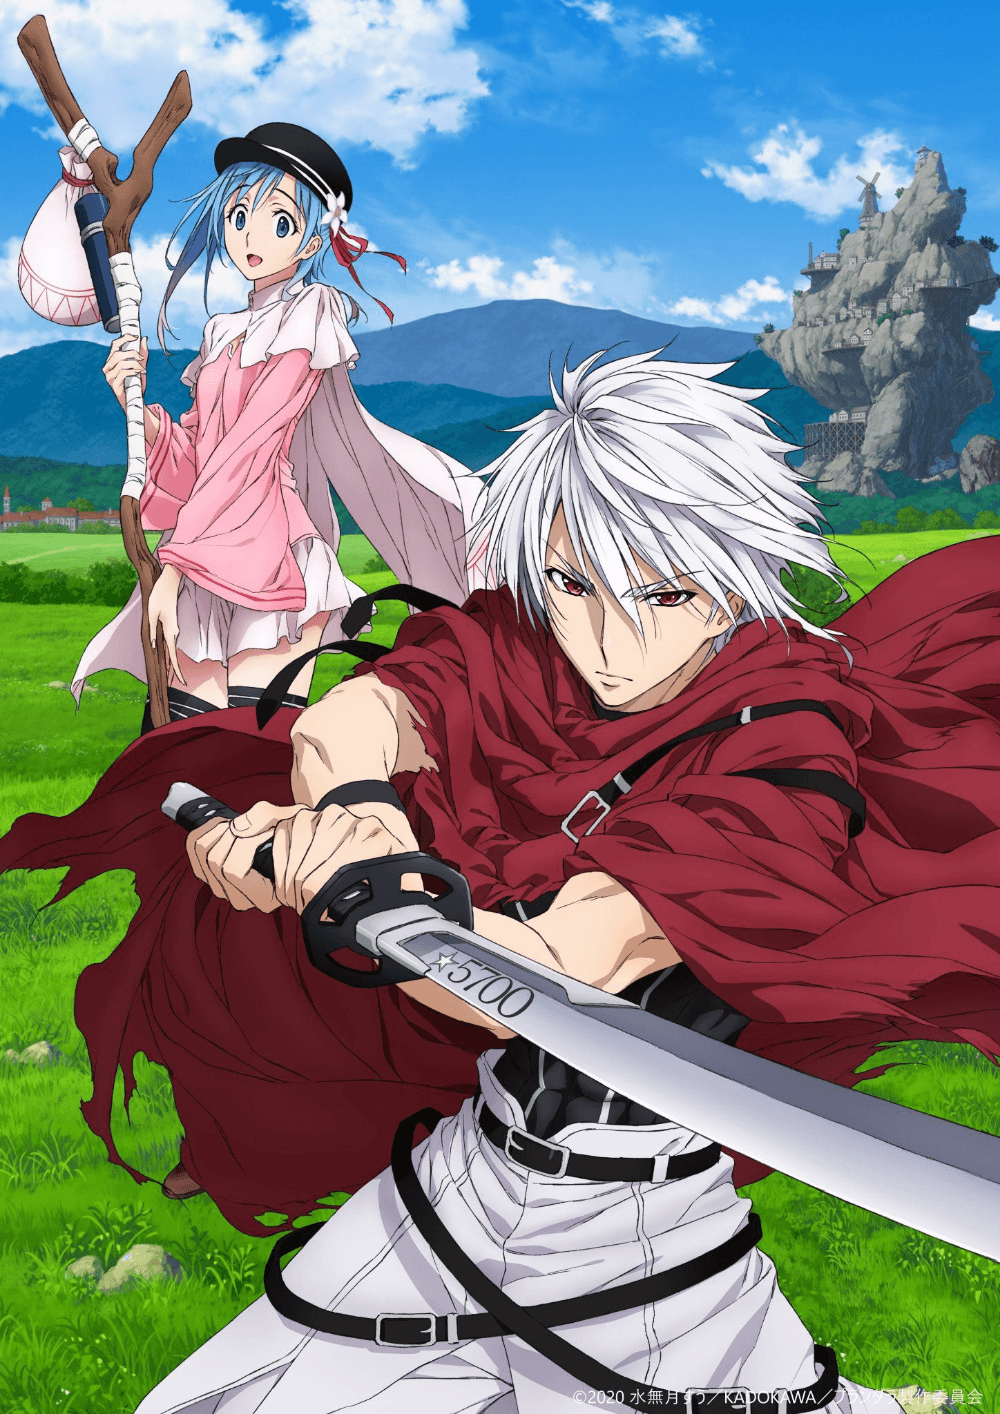 Where to watch Plunderer anime? All streaming platforms explored